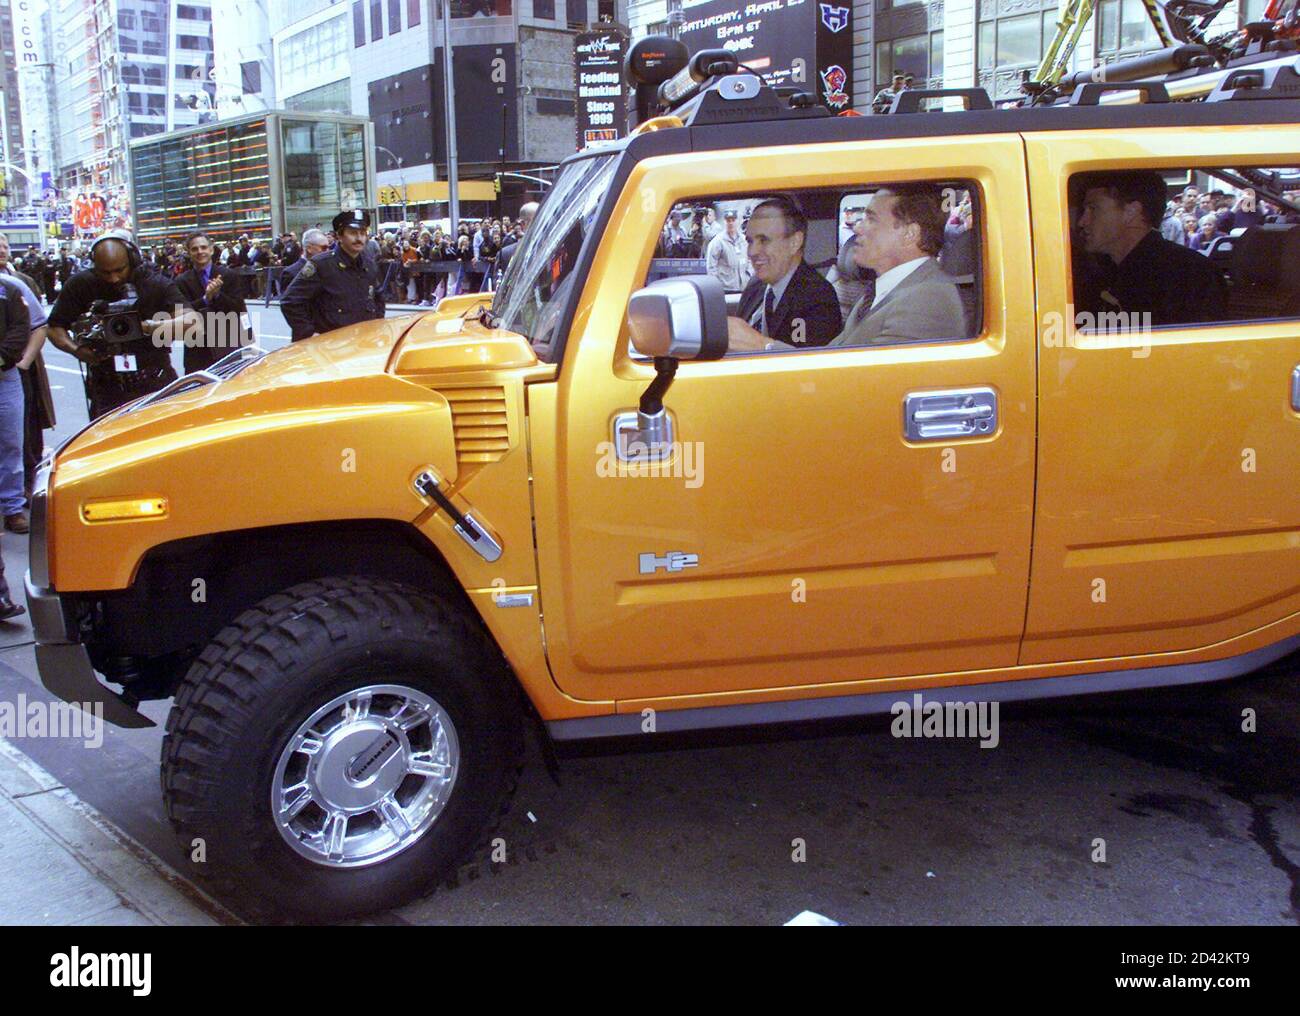 Actor Arnold Schwarzenegger drives a new Hummer H2 SUT (Sport Utility  Truck) over a curb in New York on April 10, 2001 at the world premier of  the concept vehicle. The Hummer